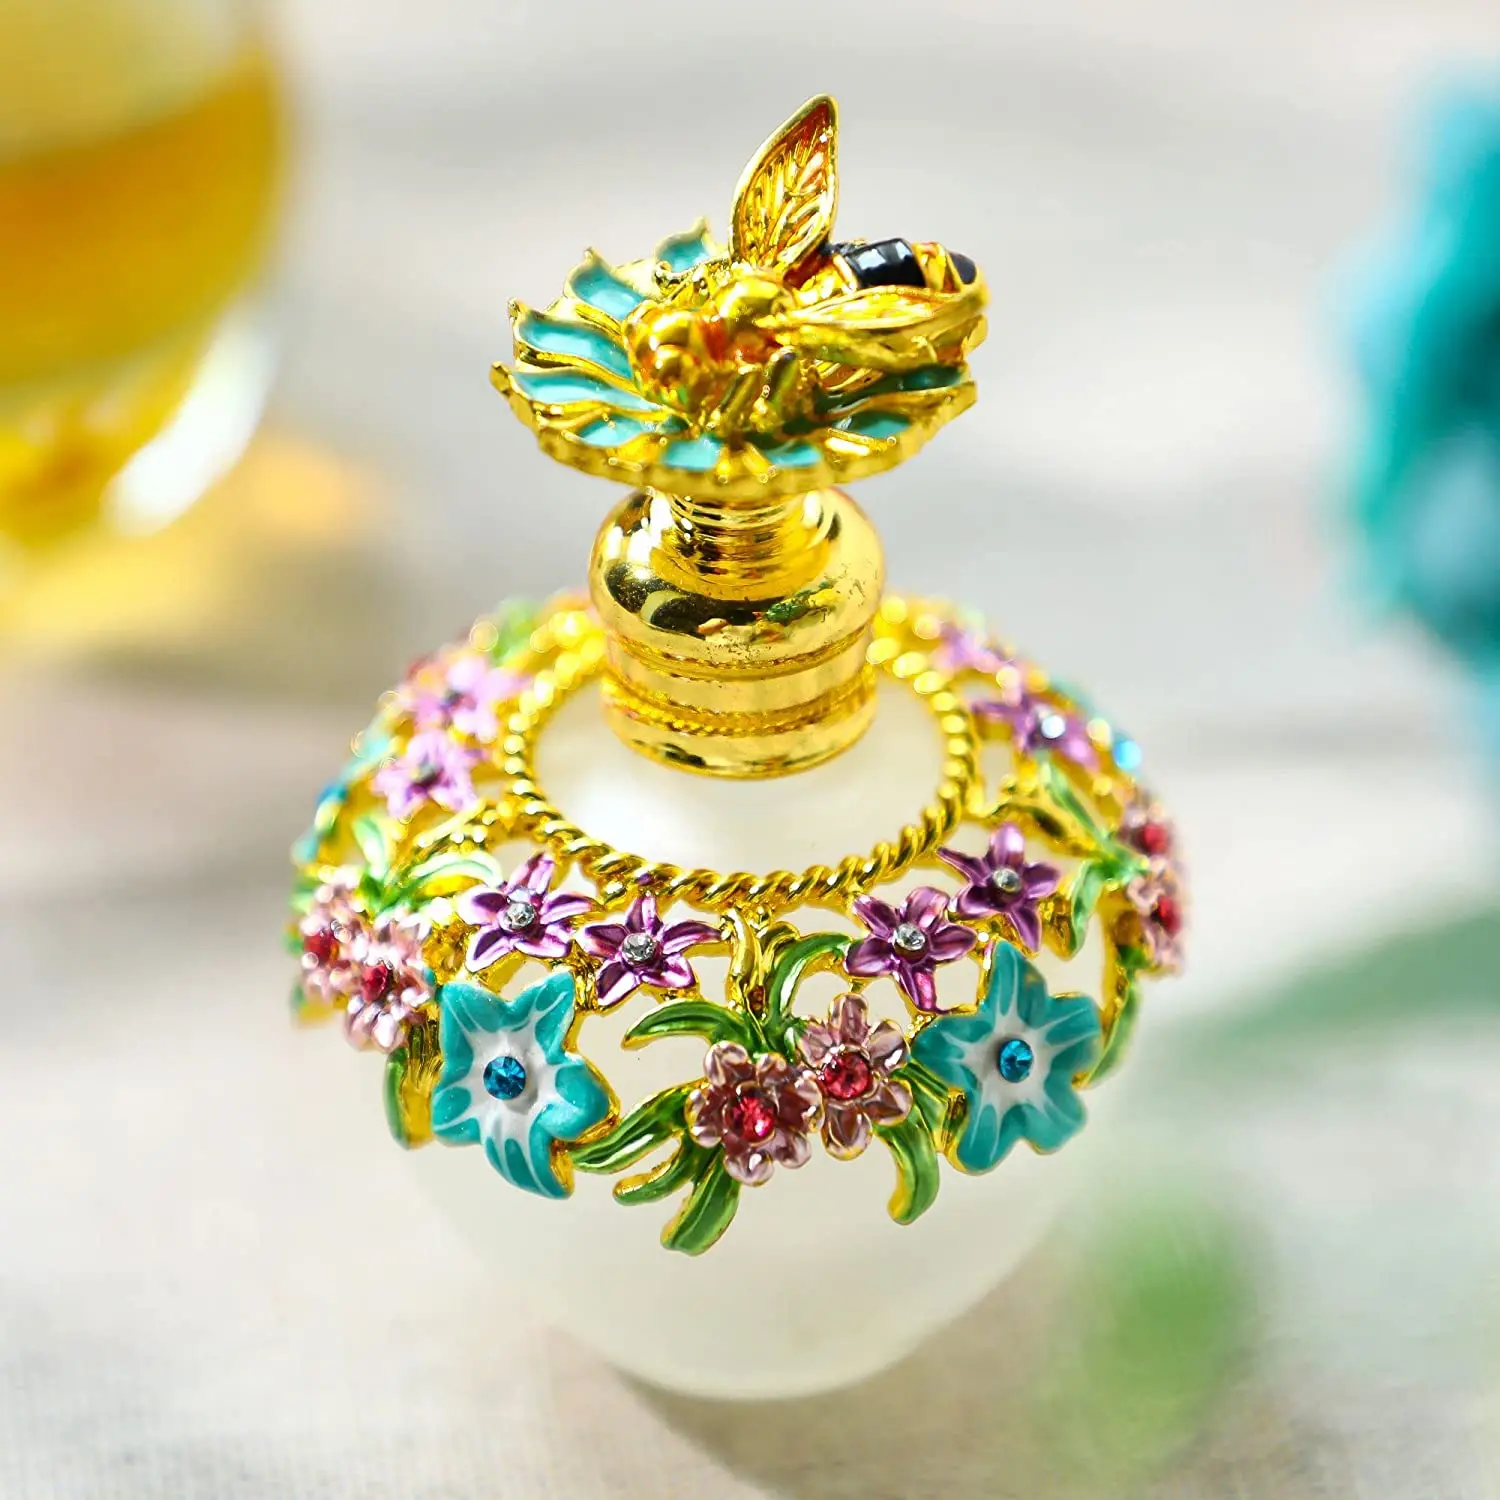 H&D Fancy Glass Perfume Bottle Empty with Flowers Bee Charm Decorative Vintage Crystal Perfume Decanter(Golden,40ML) vintage ornament motorcycle bell charm riding bell necklace for men motorcycle accessories jewelry with titanium steel chain